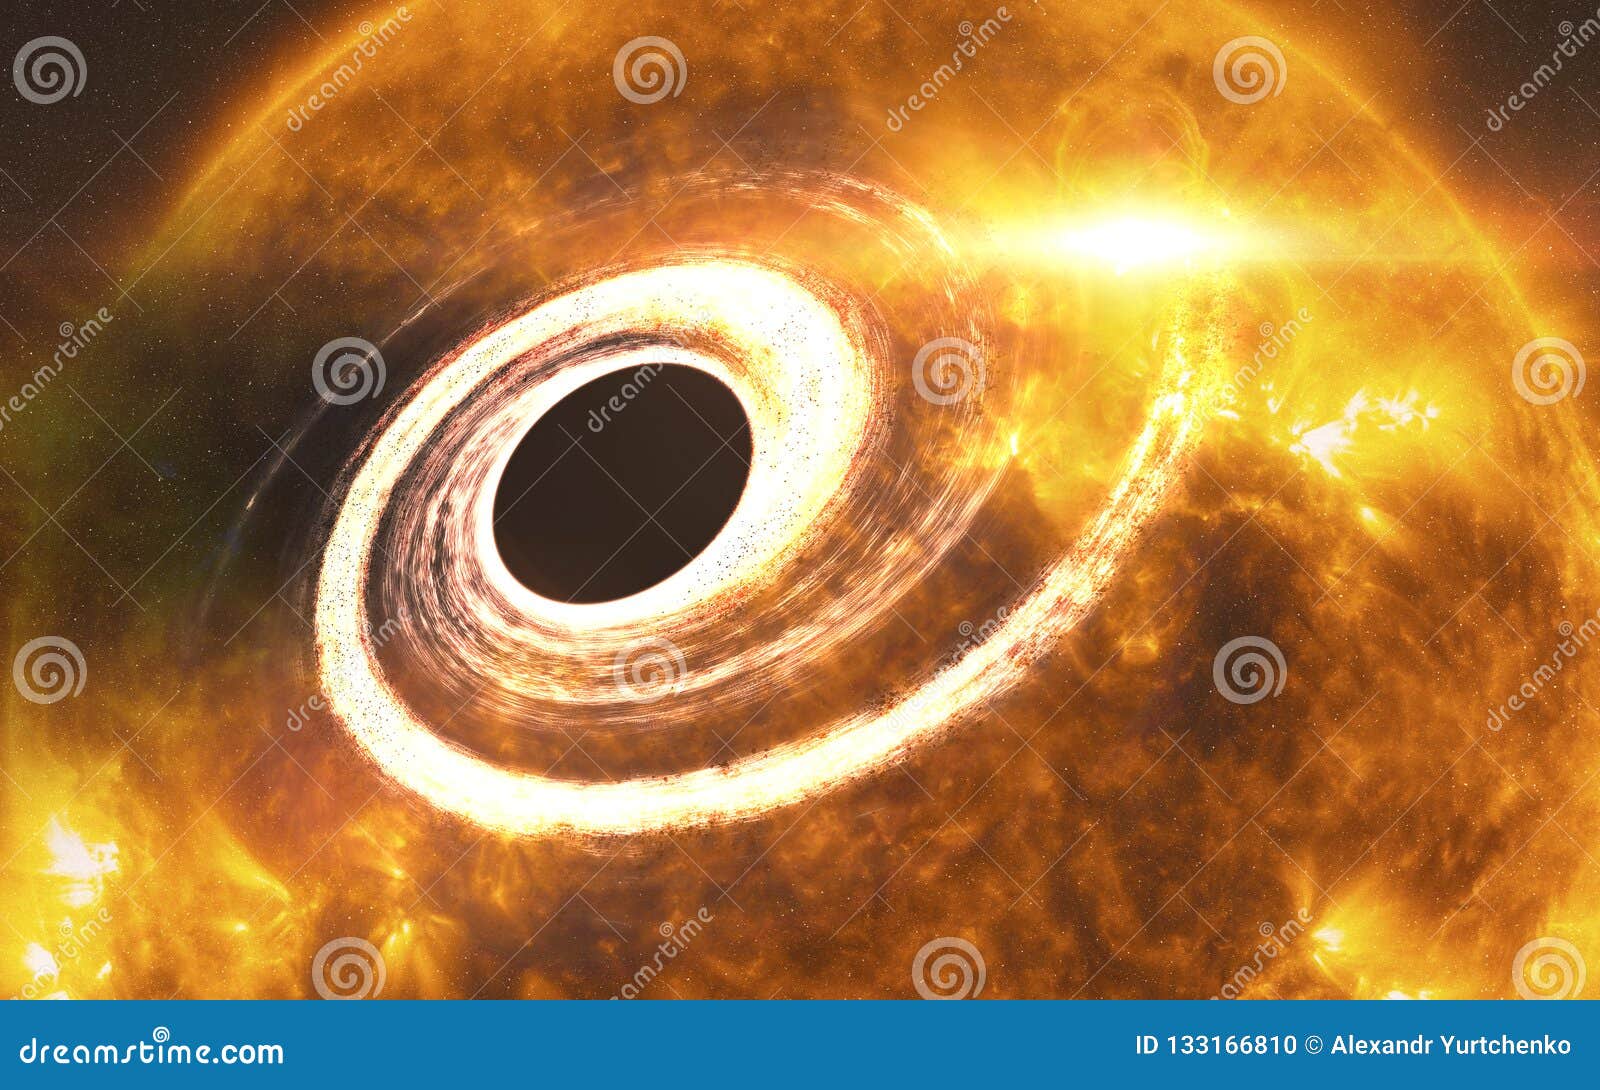  Orange  Giant Star With Black  Hole  Elements Of This Image 